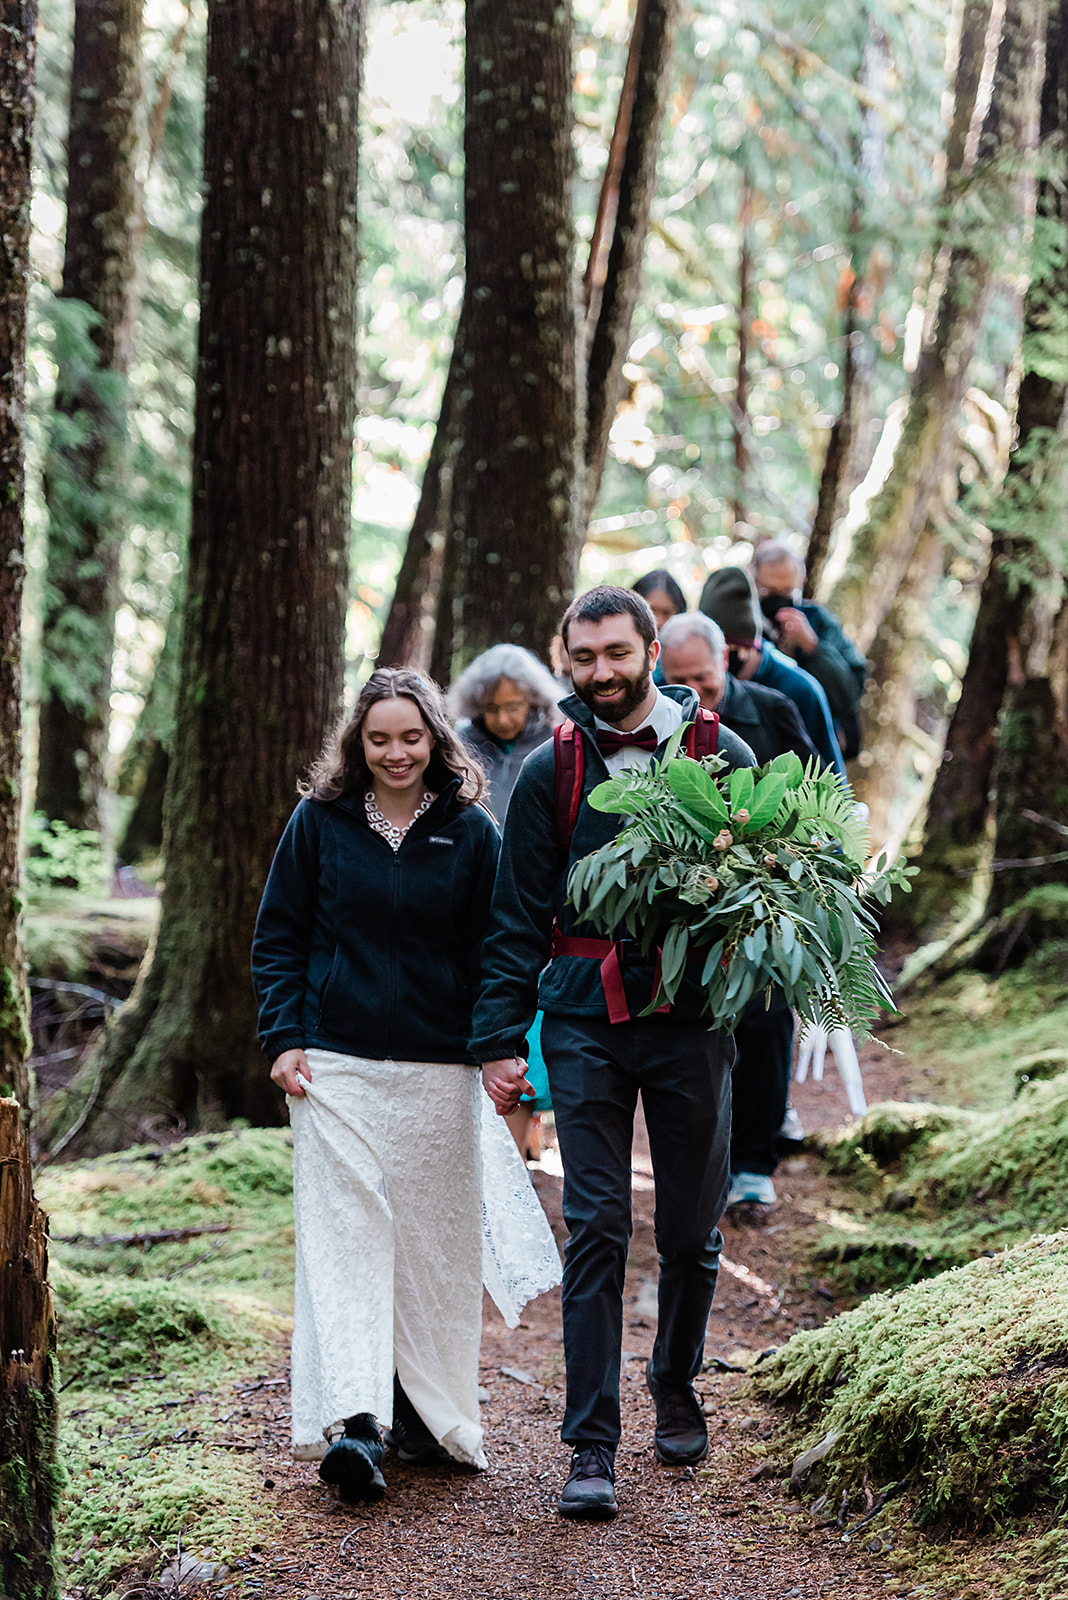 This is a picture of a small crew walking to an elopement ceremony.